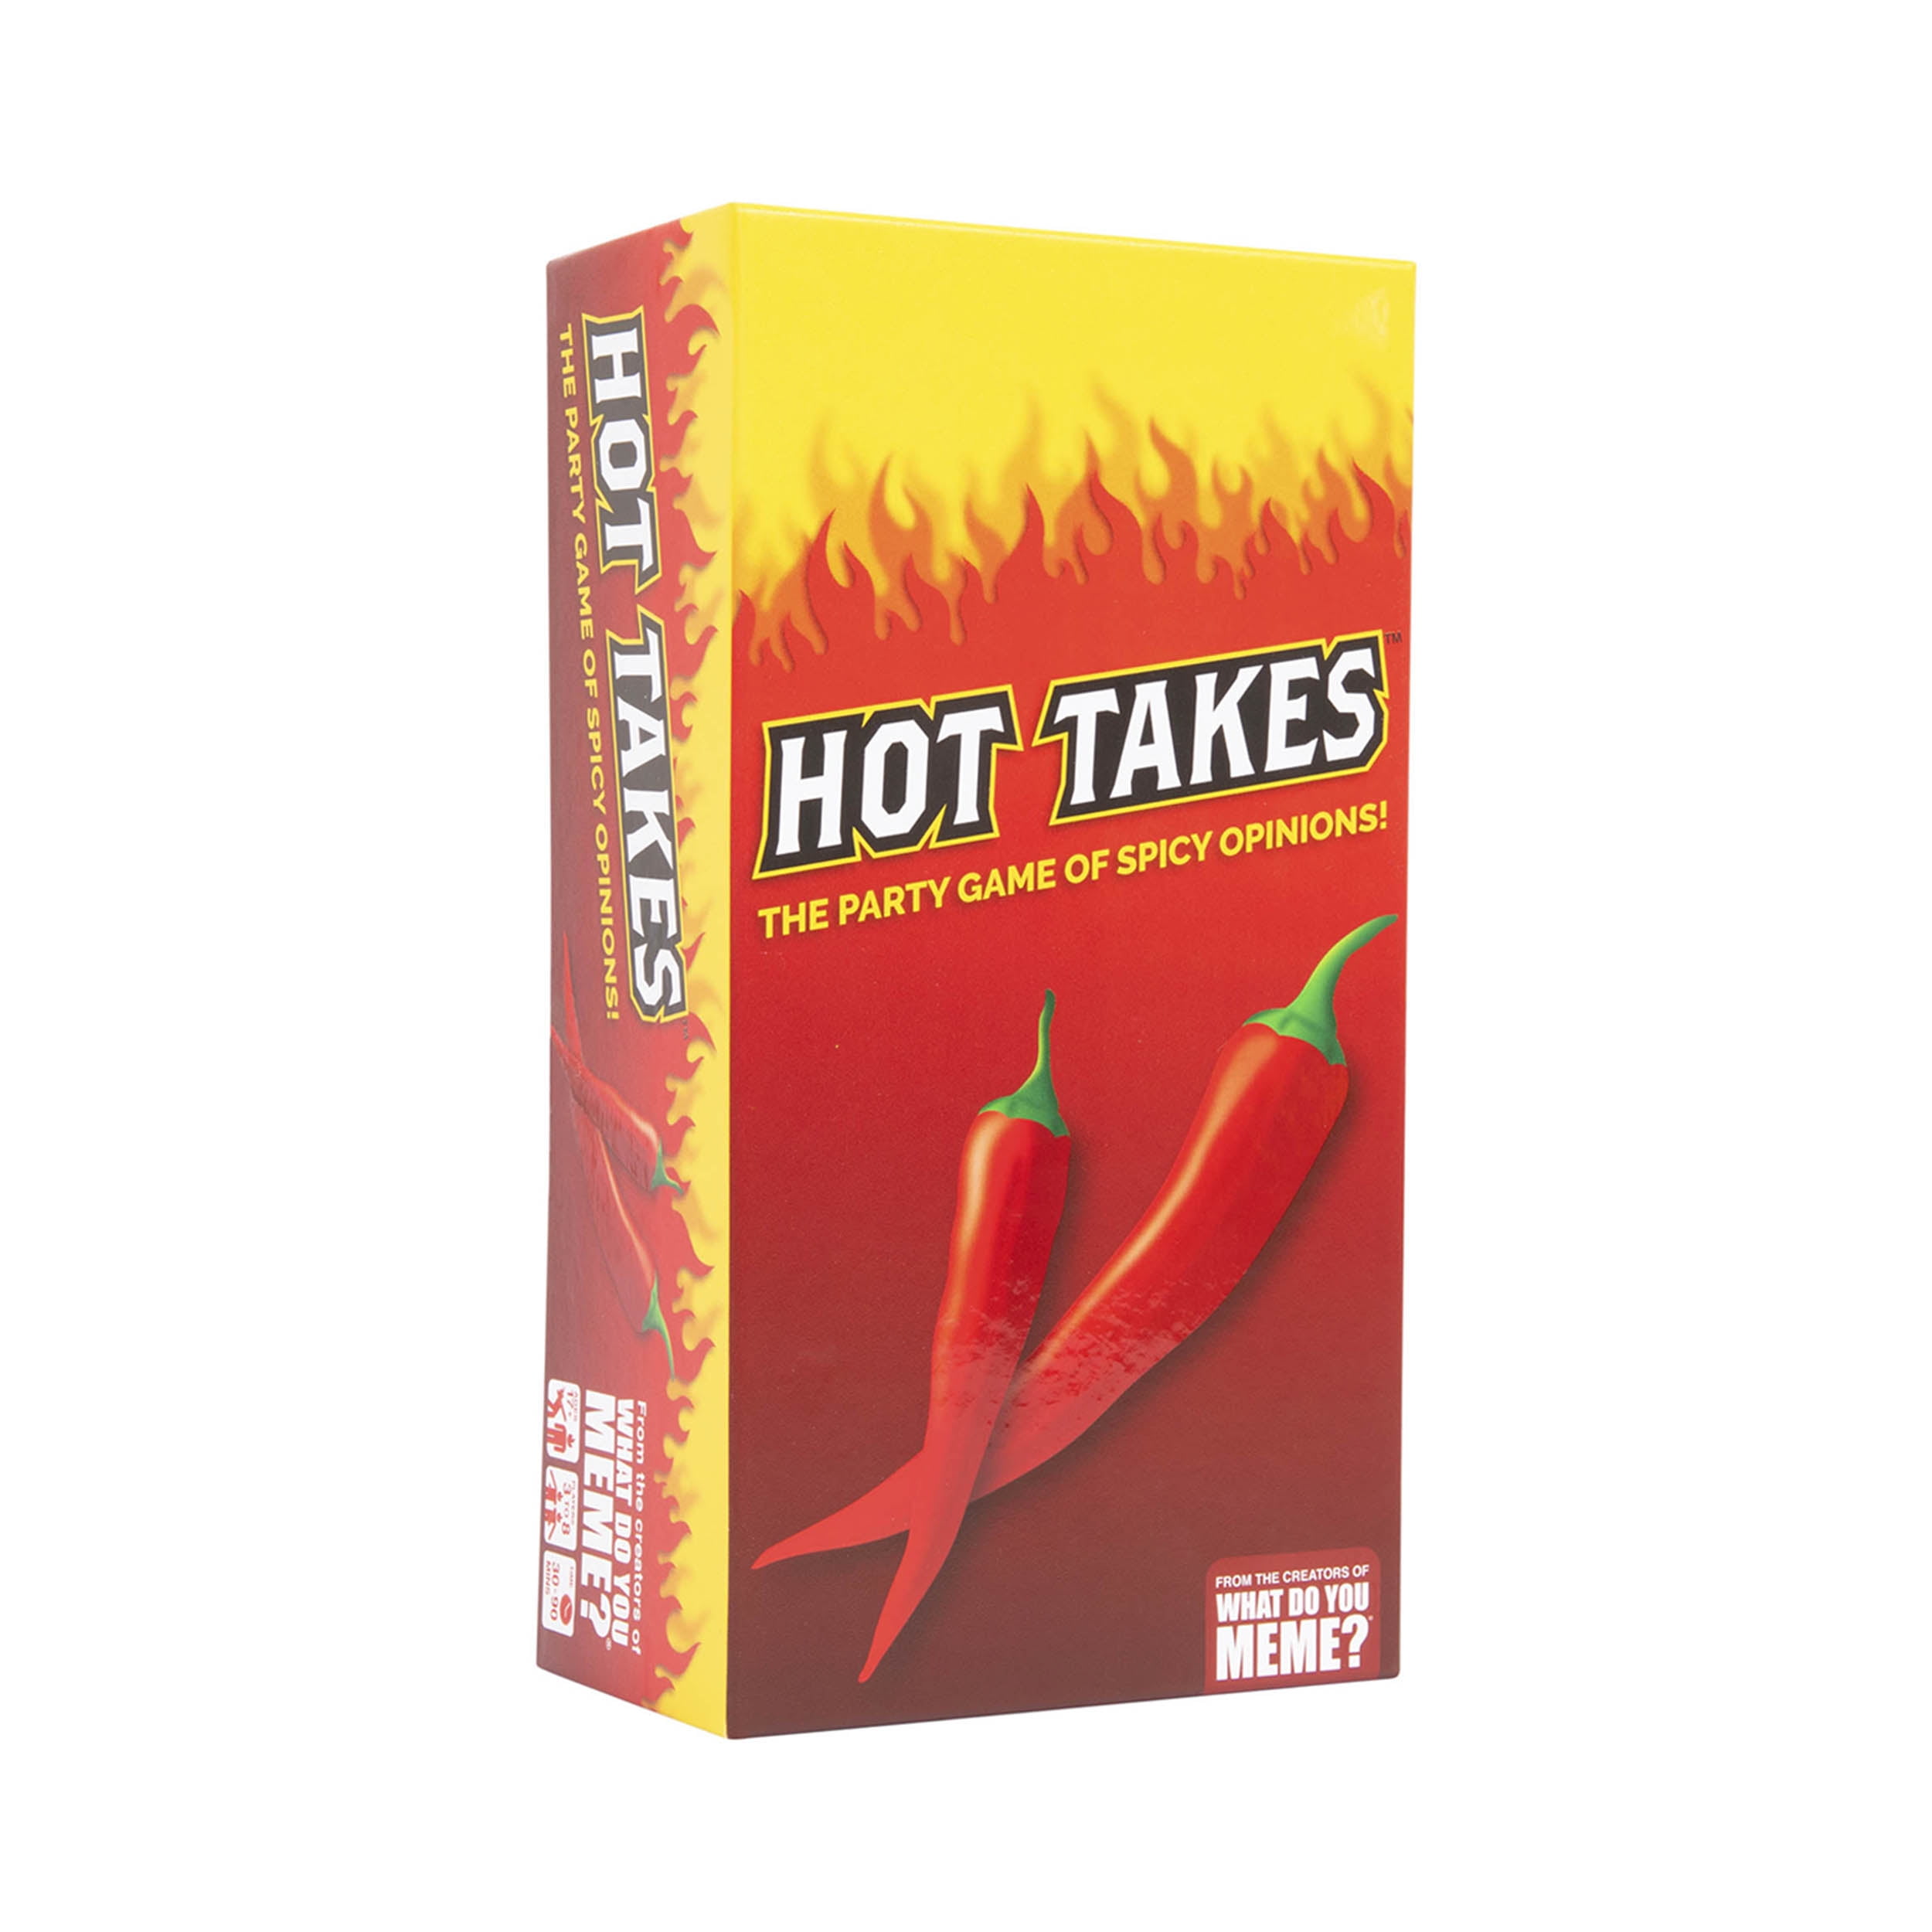 Hot Takes - the Adult Party Game of Spicy Opinions - by What Do You Meme? - Hilarious Card Game - Ages 17+